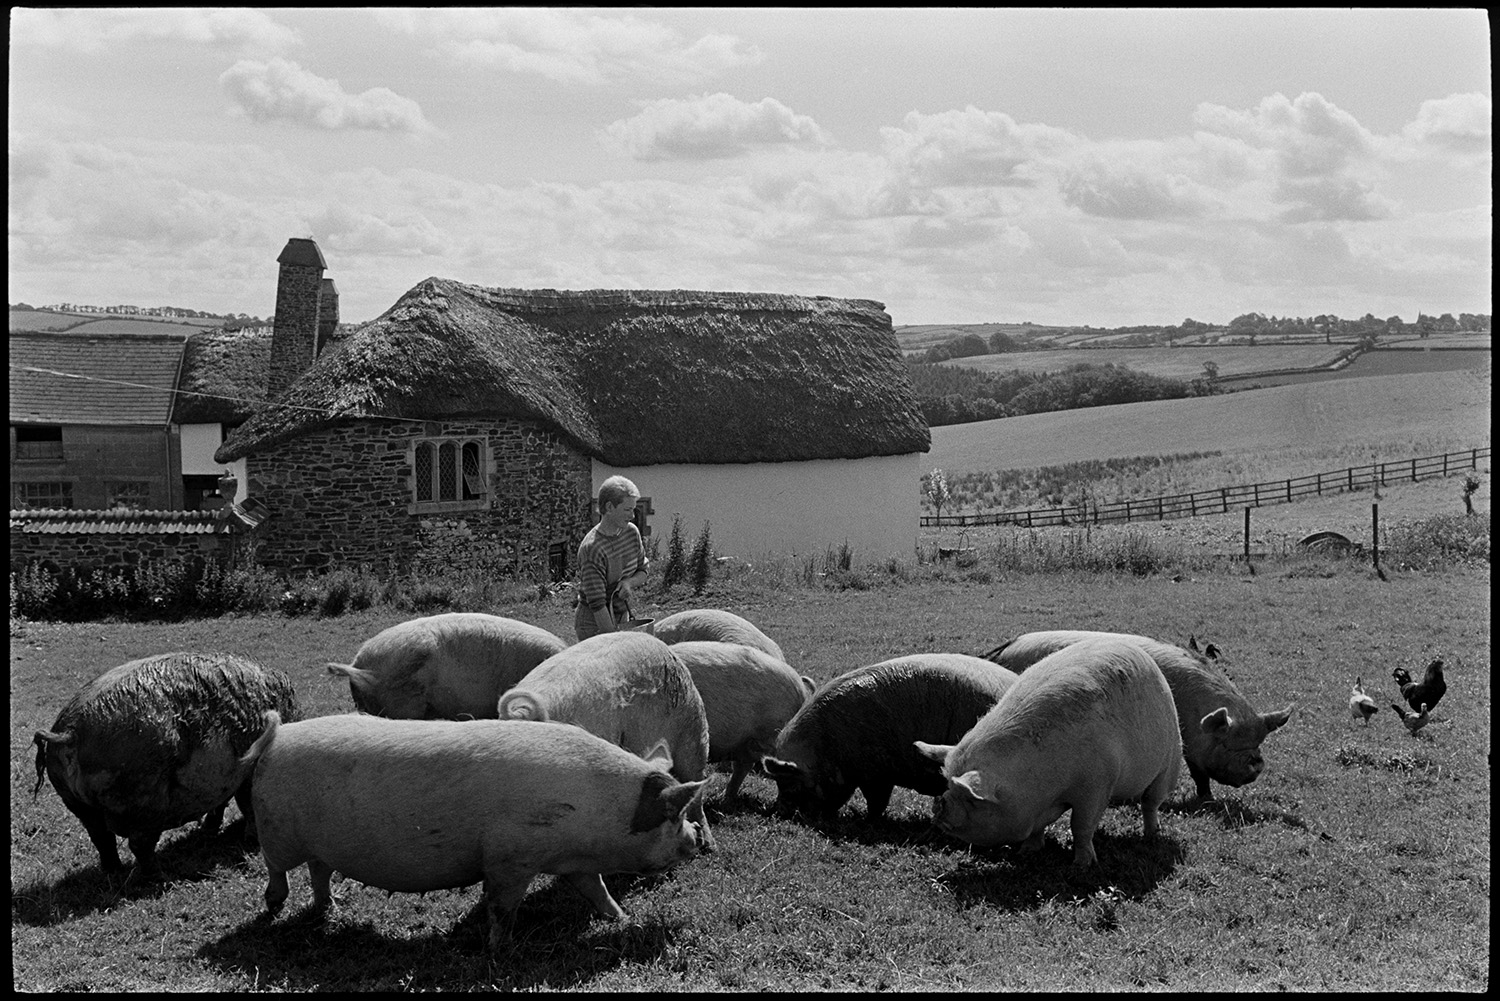 Woman farmer feeding Chinese pigs. 
[Anne Petch feeding Chinese pigs in a field at Heal Farm, Kings Nympton.  Chickens are also in the field. A thatched farmhouse and landscape of fields and trees are visible in the background.]